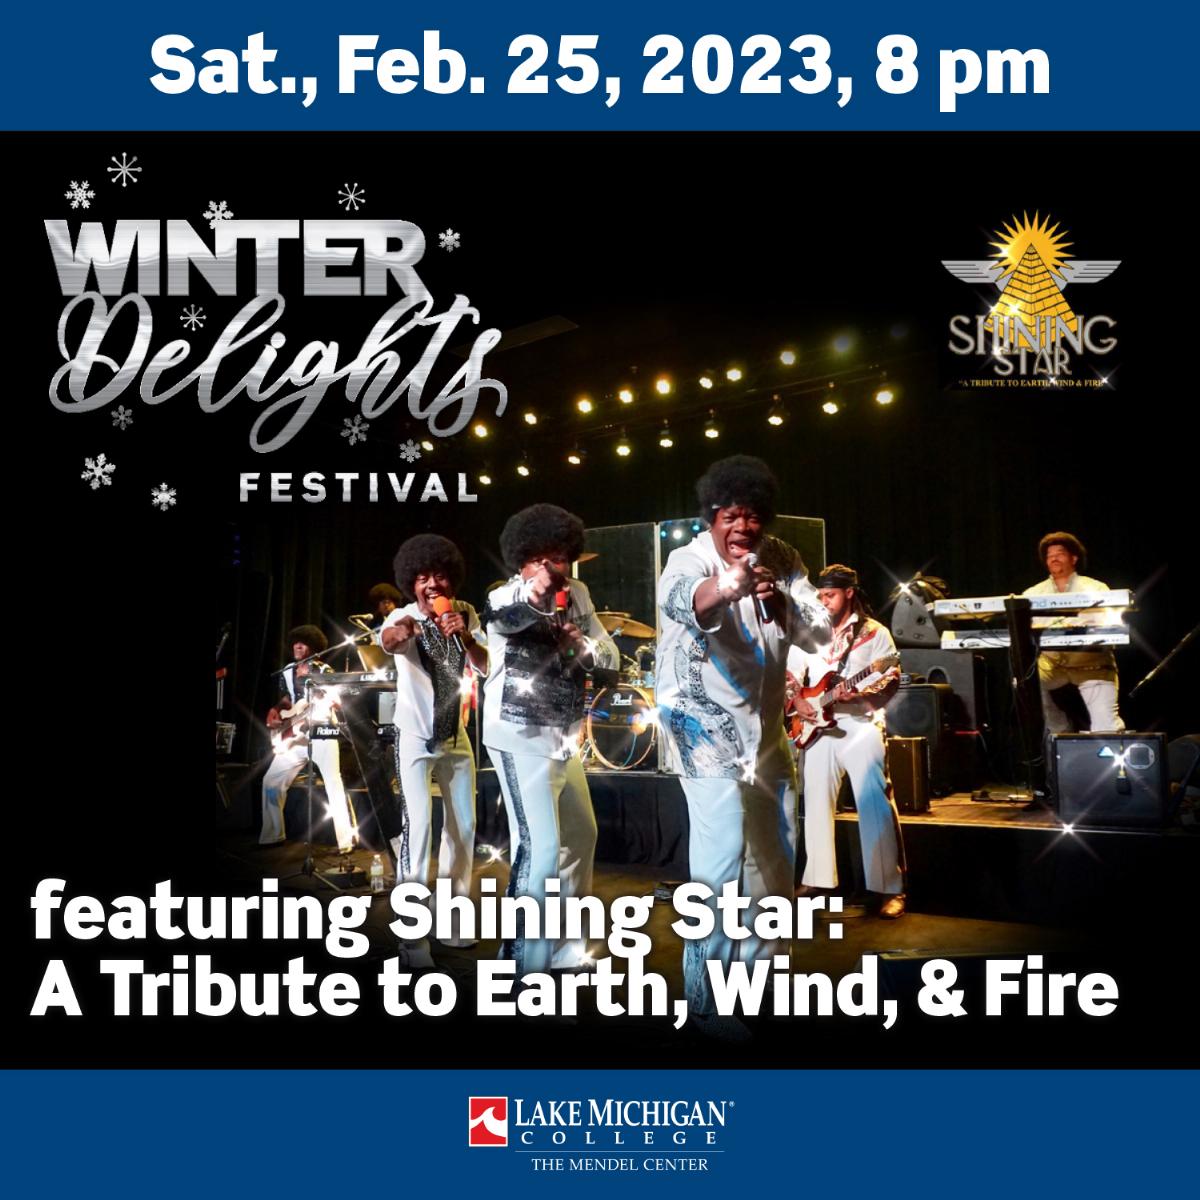 Winter Delights with Shining Star: A Tribute to Earth, Wind, & Fire